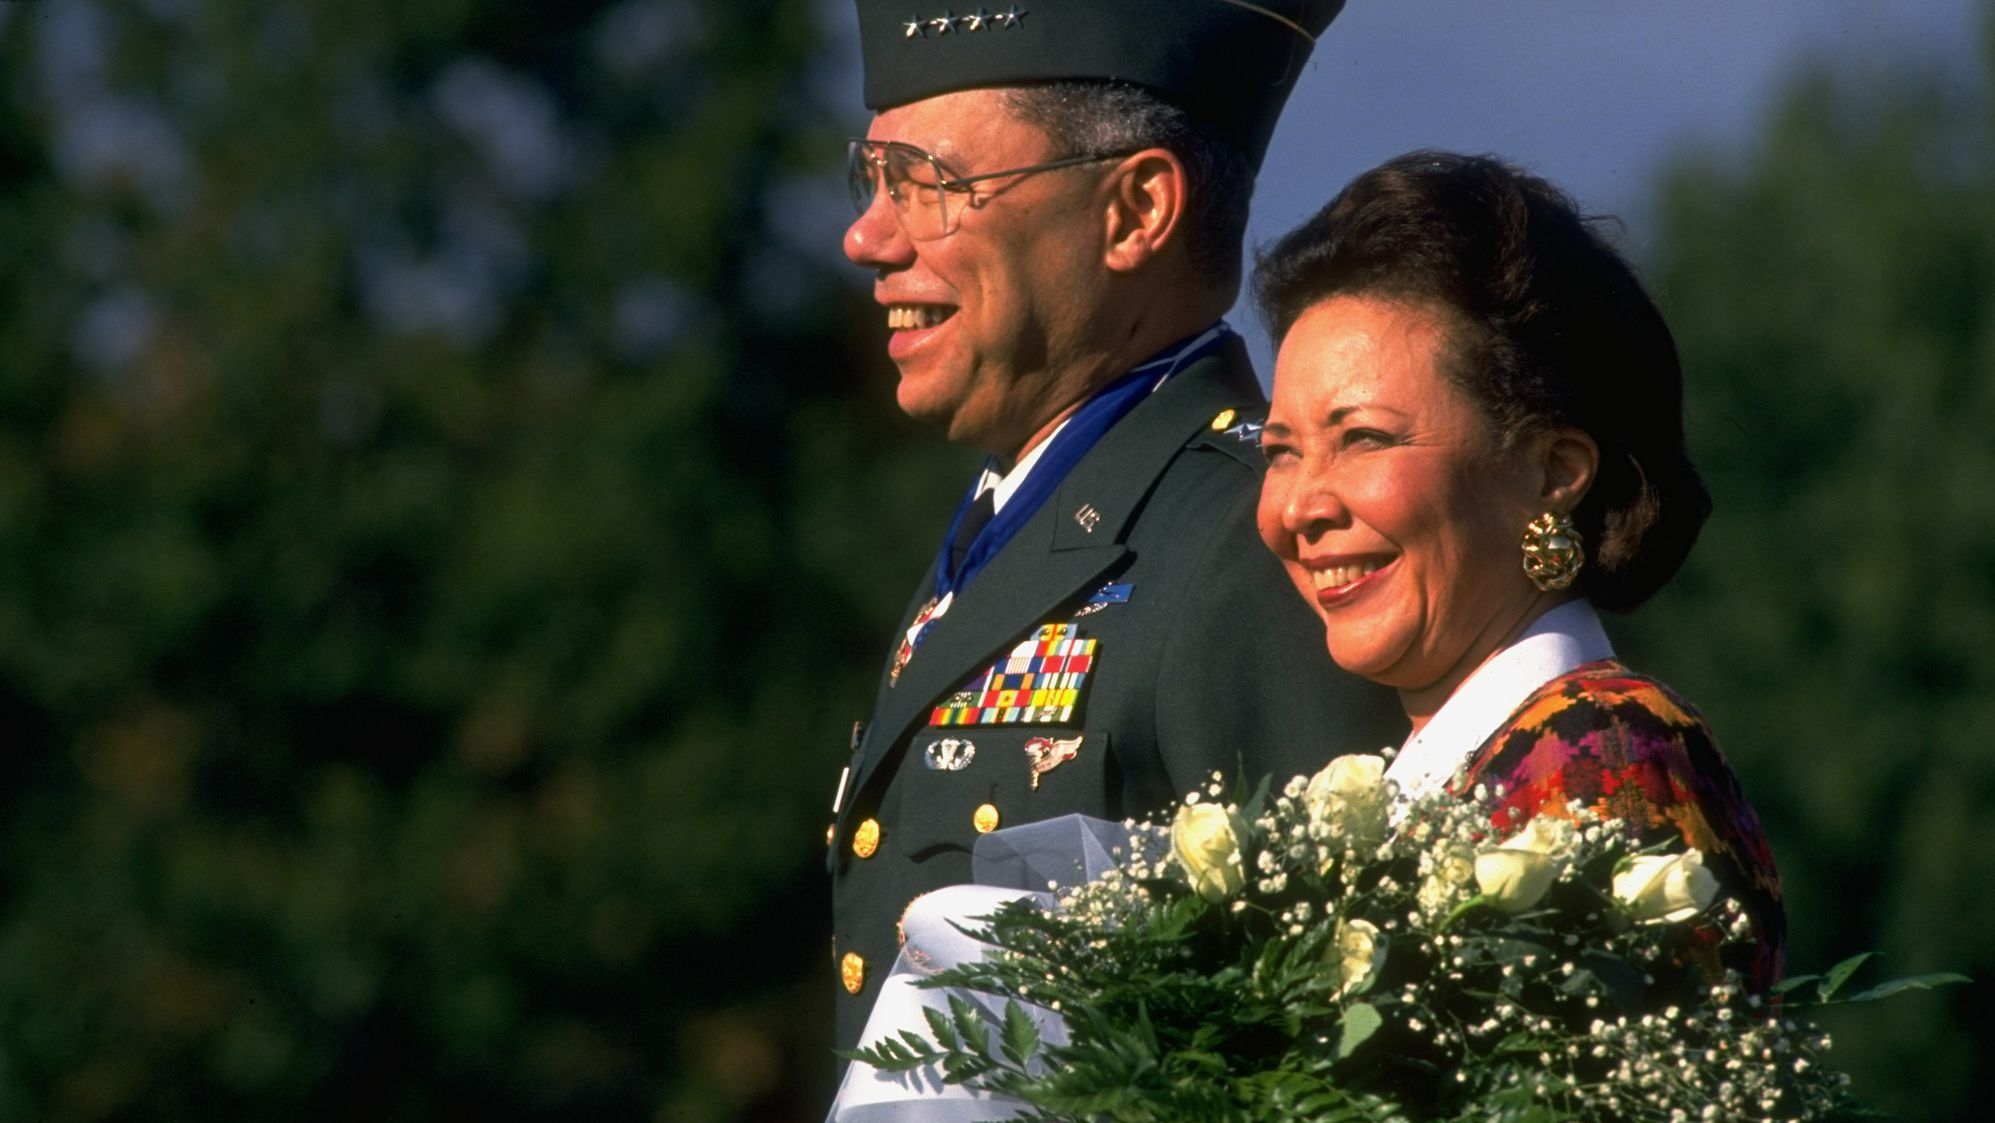 Colin Powell and his wife, Alma Powell, during his farewell as chairman of Joints Chief of Staff in September 1993.